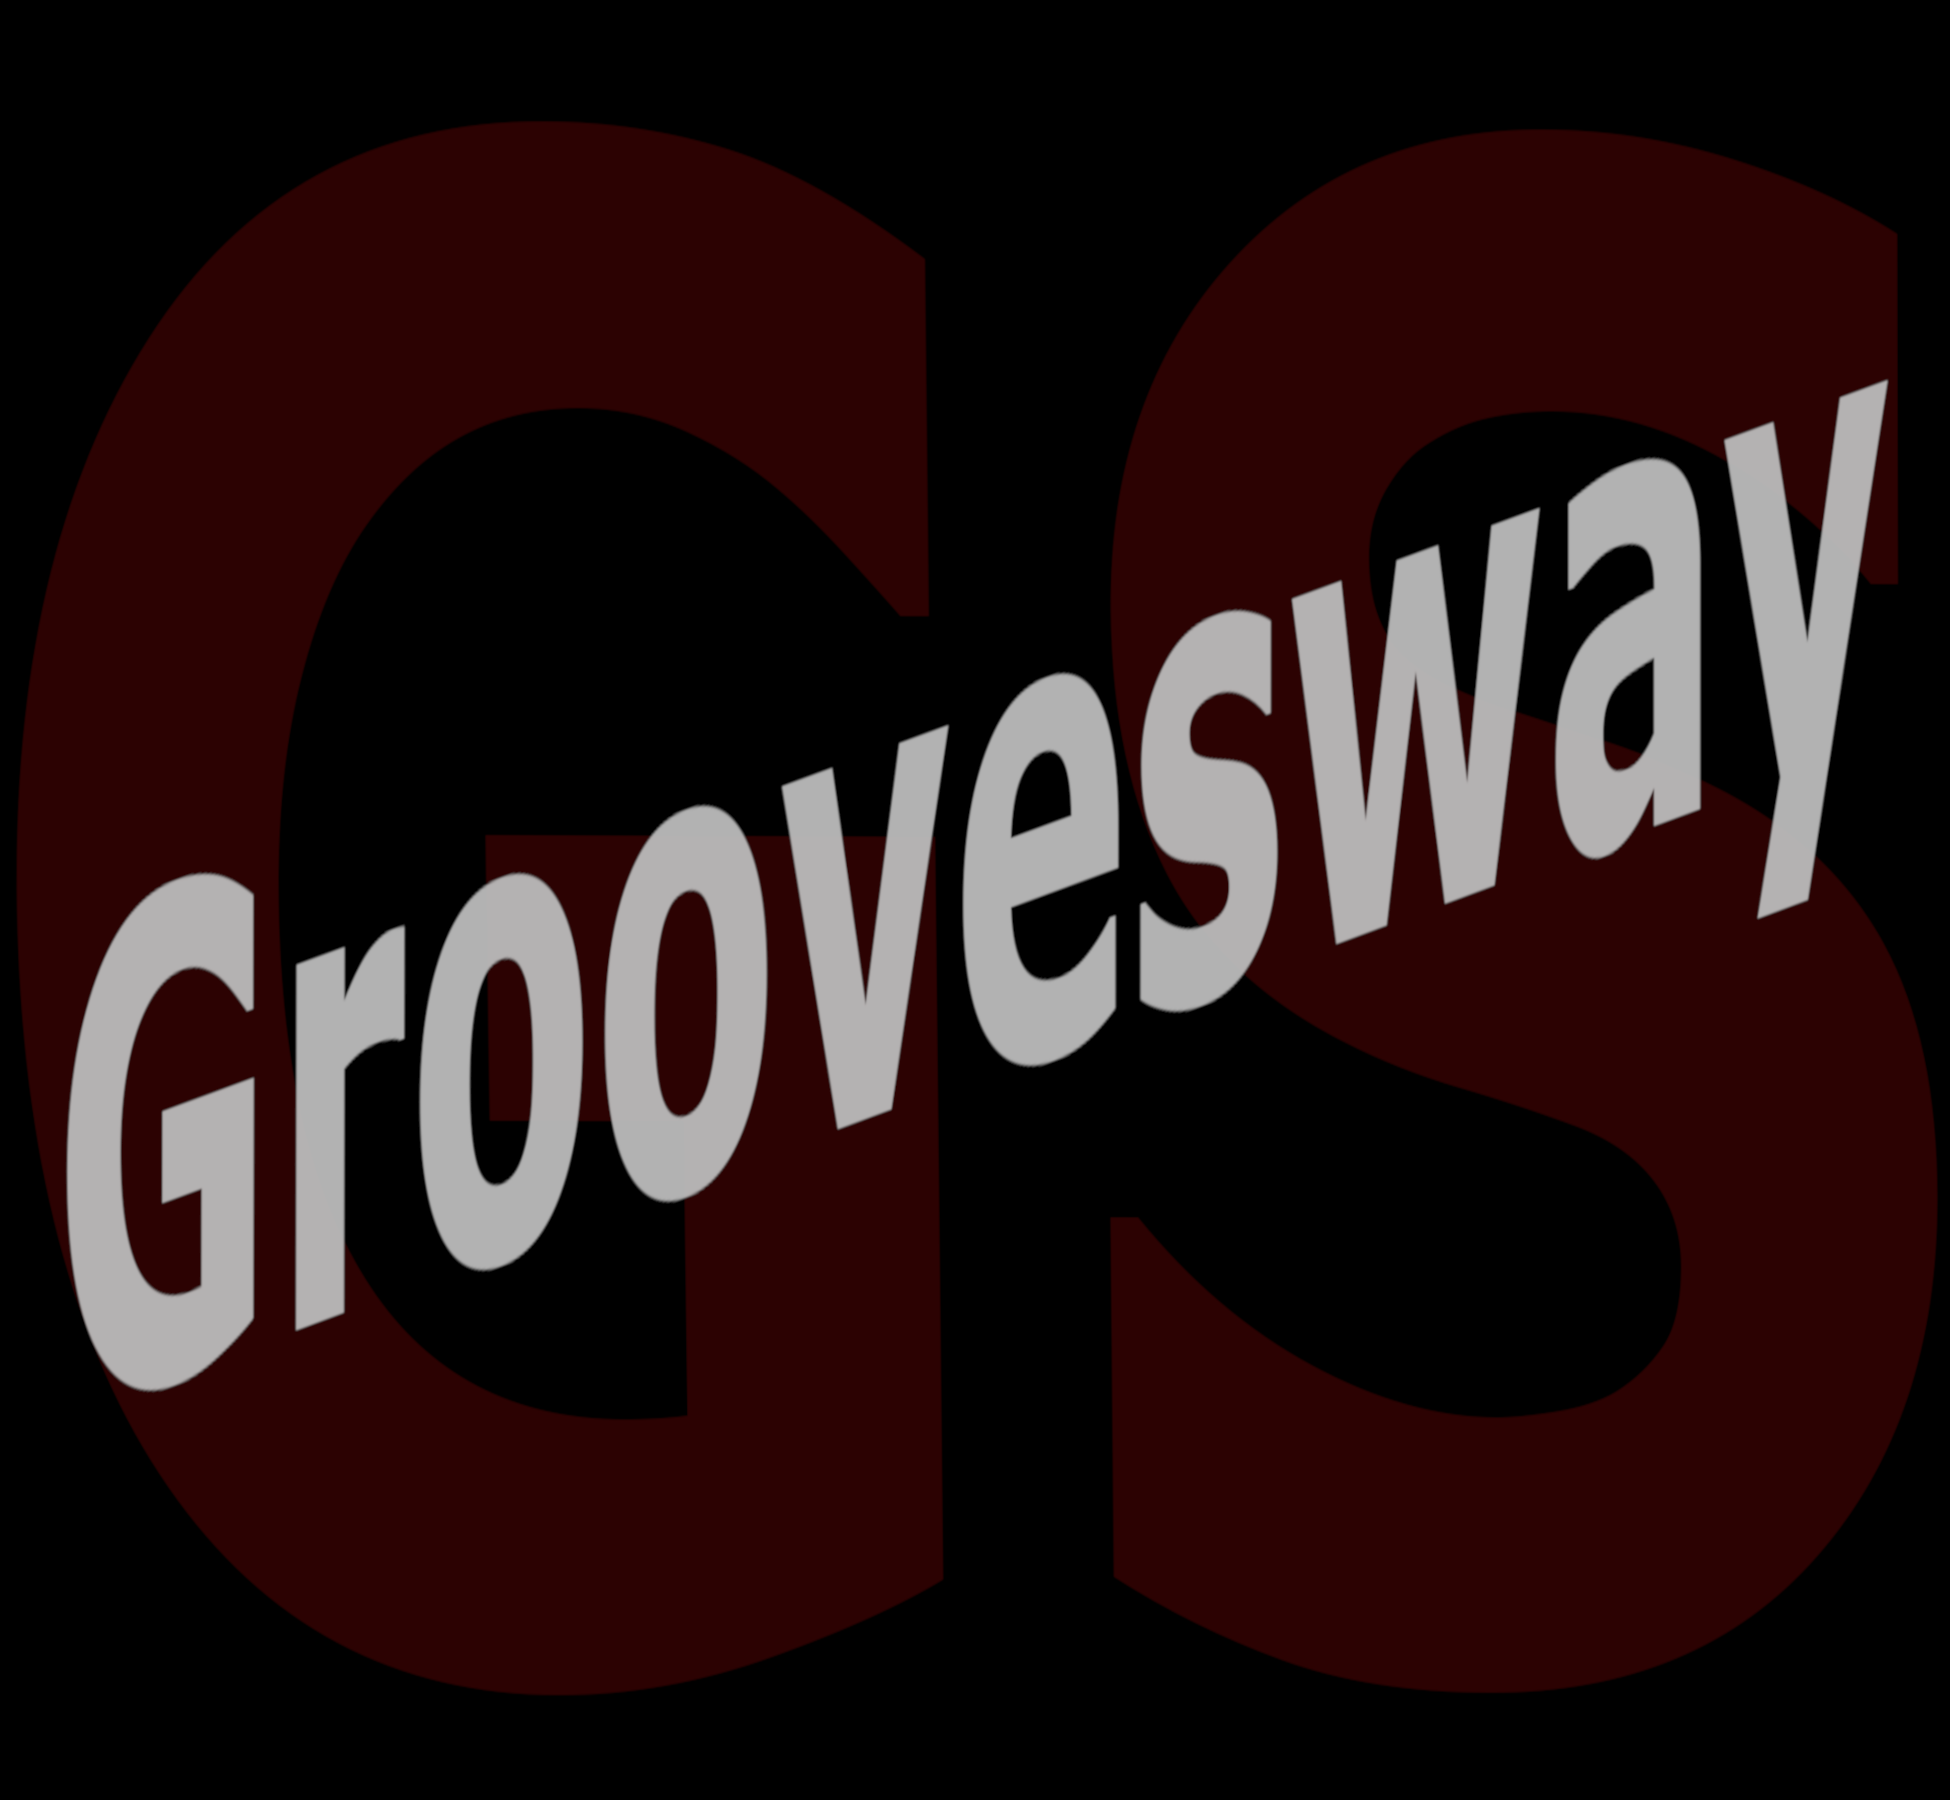 groovesway